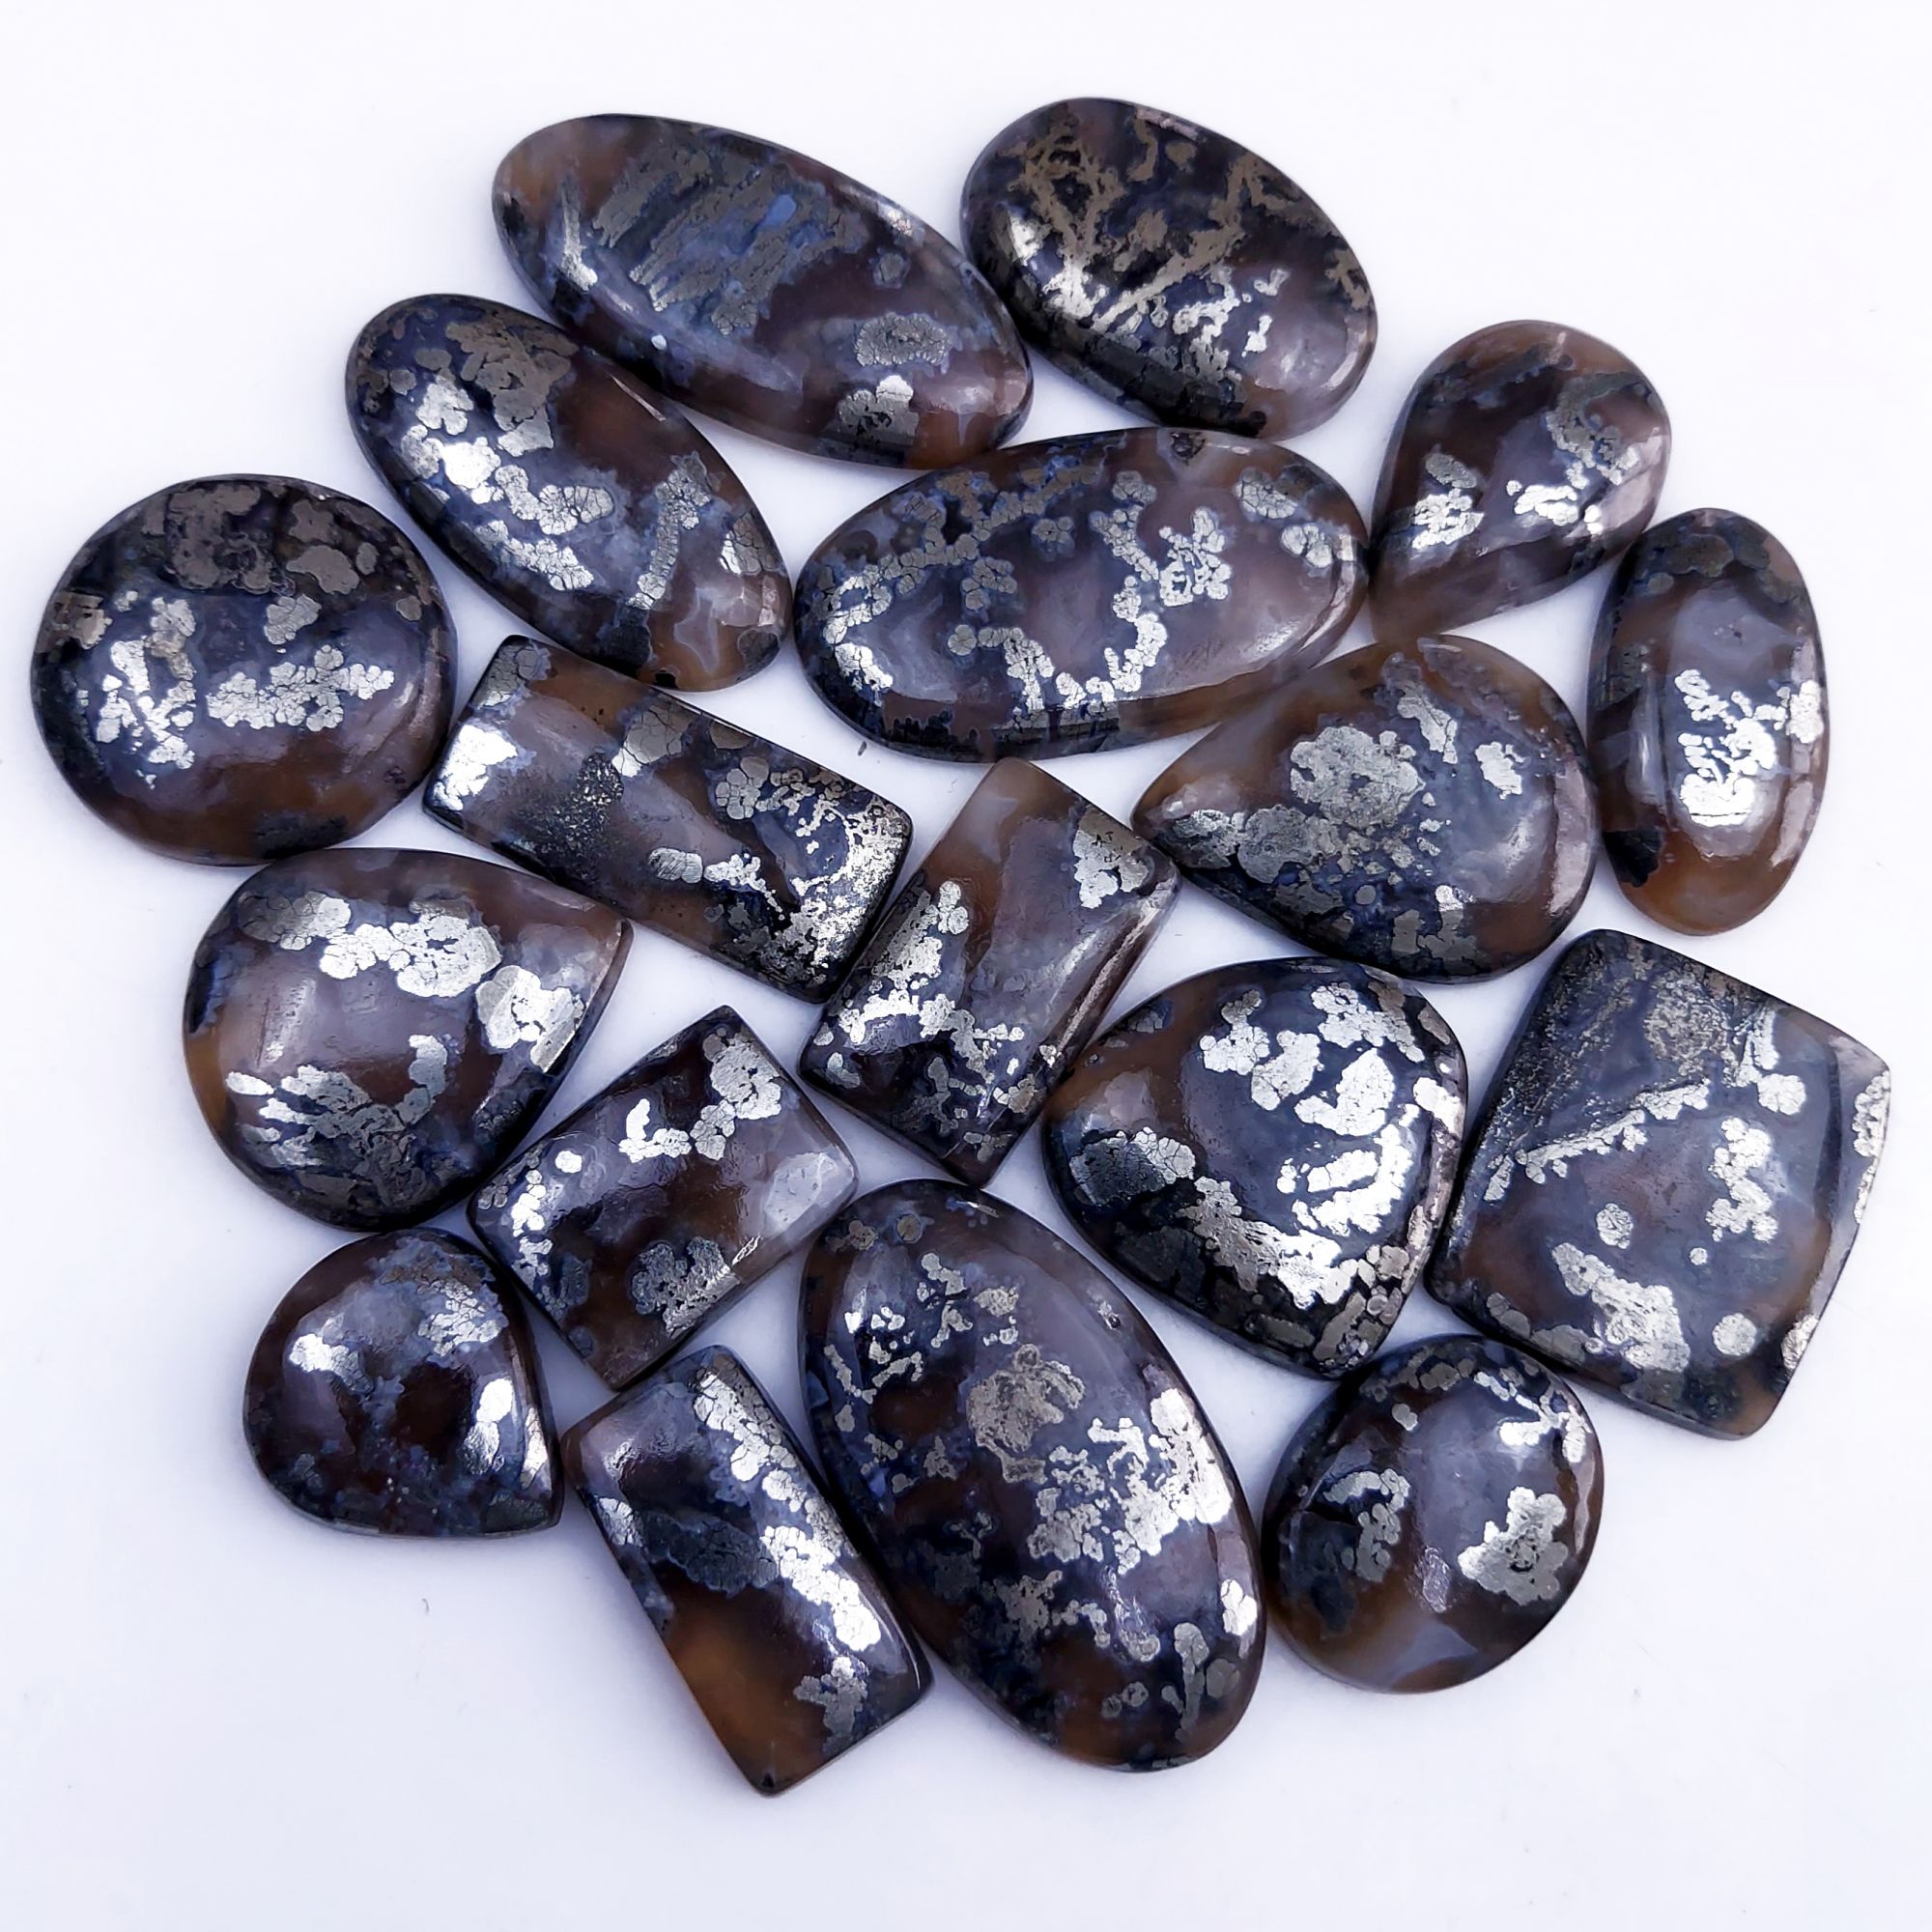 18Pcs 637Cts Natural Marcasite Grey Cabochon Back Side Unpolished Gemstone Semi-Precious Gemstones For Jewelry Making 40x20 20x18mm #10041